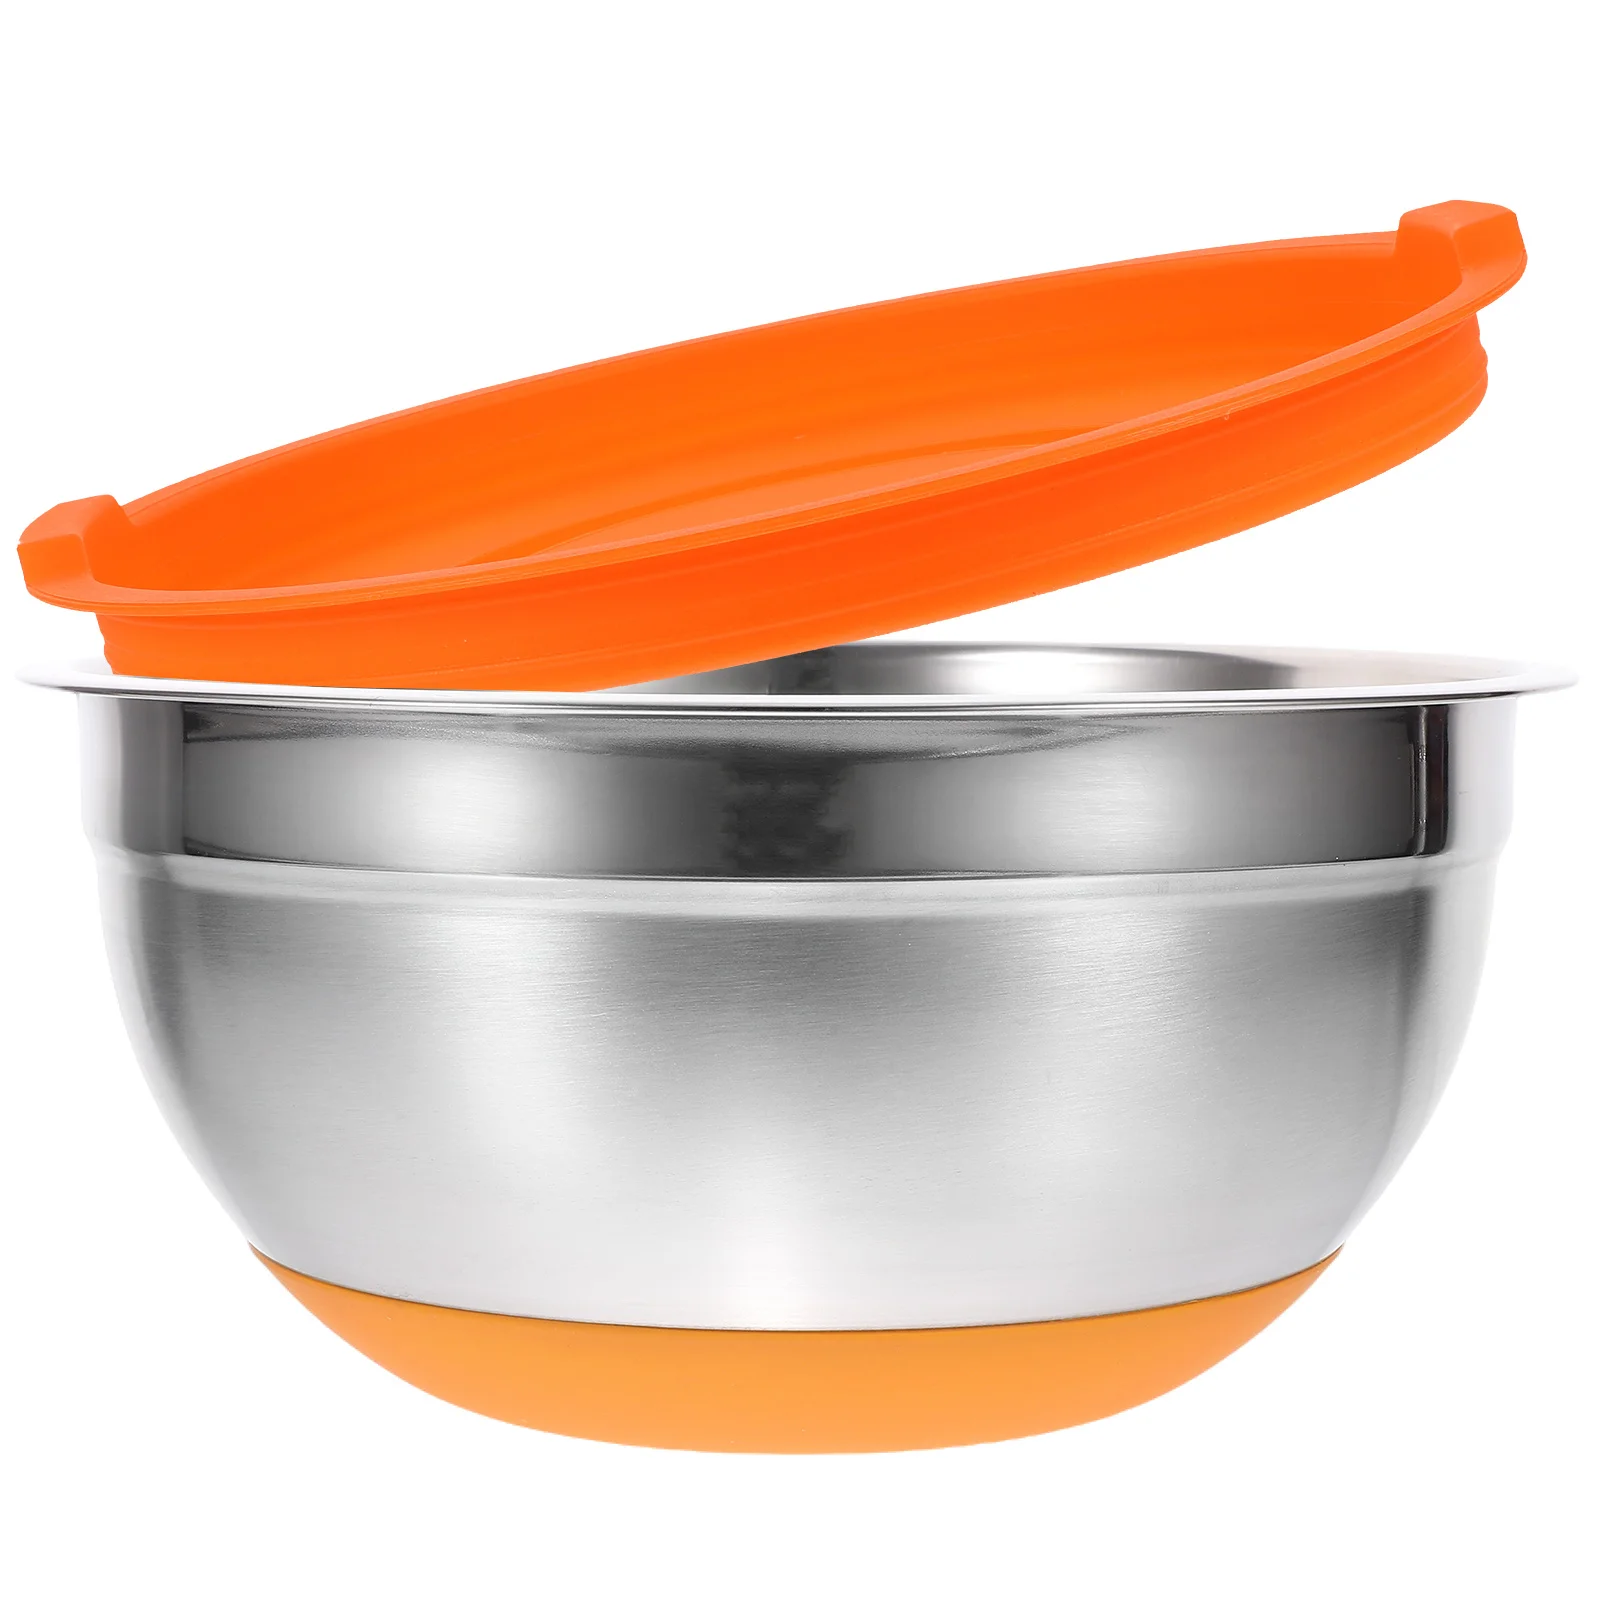 

Household Noodle Bowl Salad Container Stainless Steel Home Snack Mixing Bowls Dessert Multi-function Serving Food